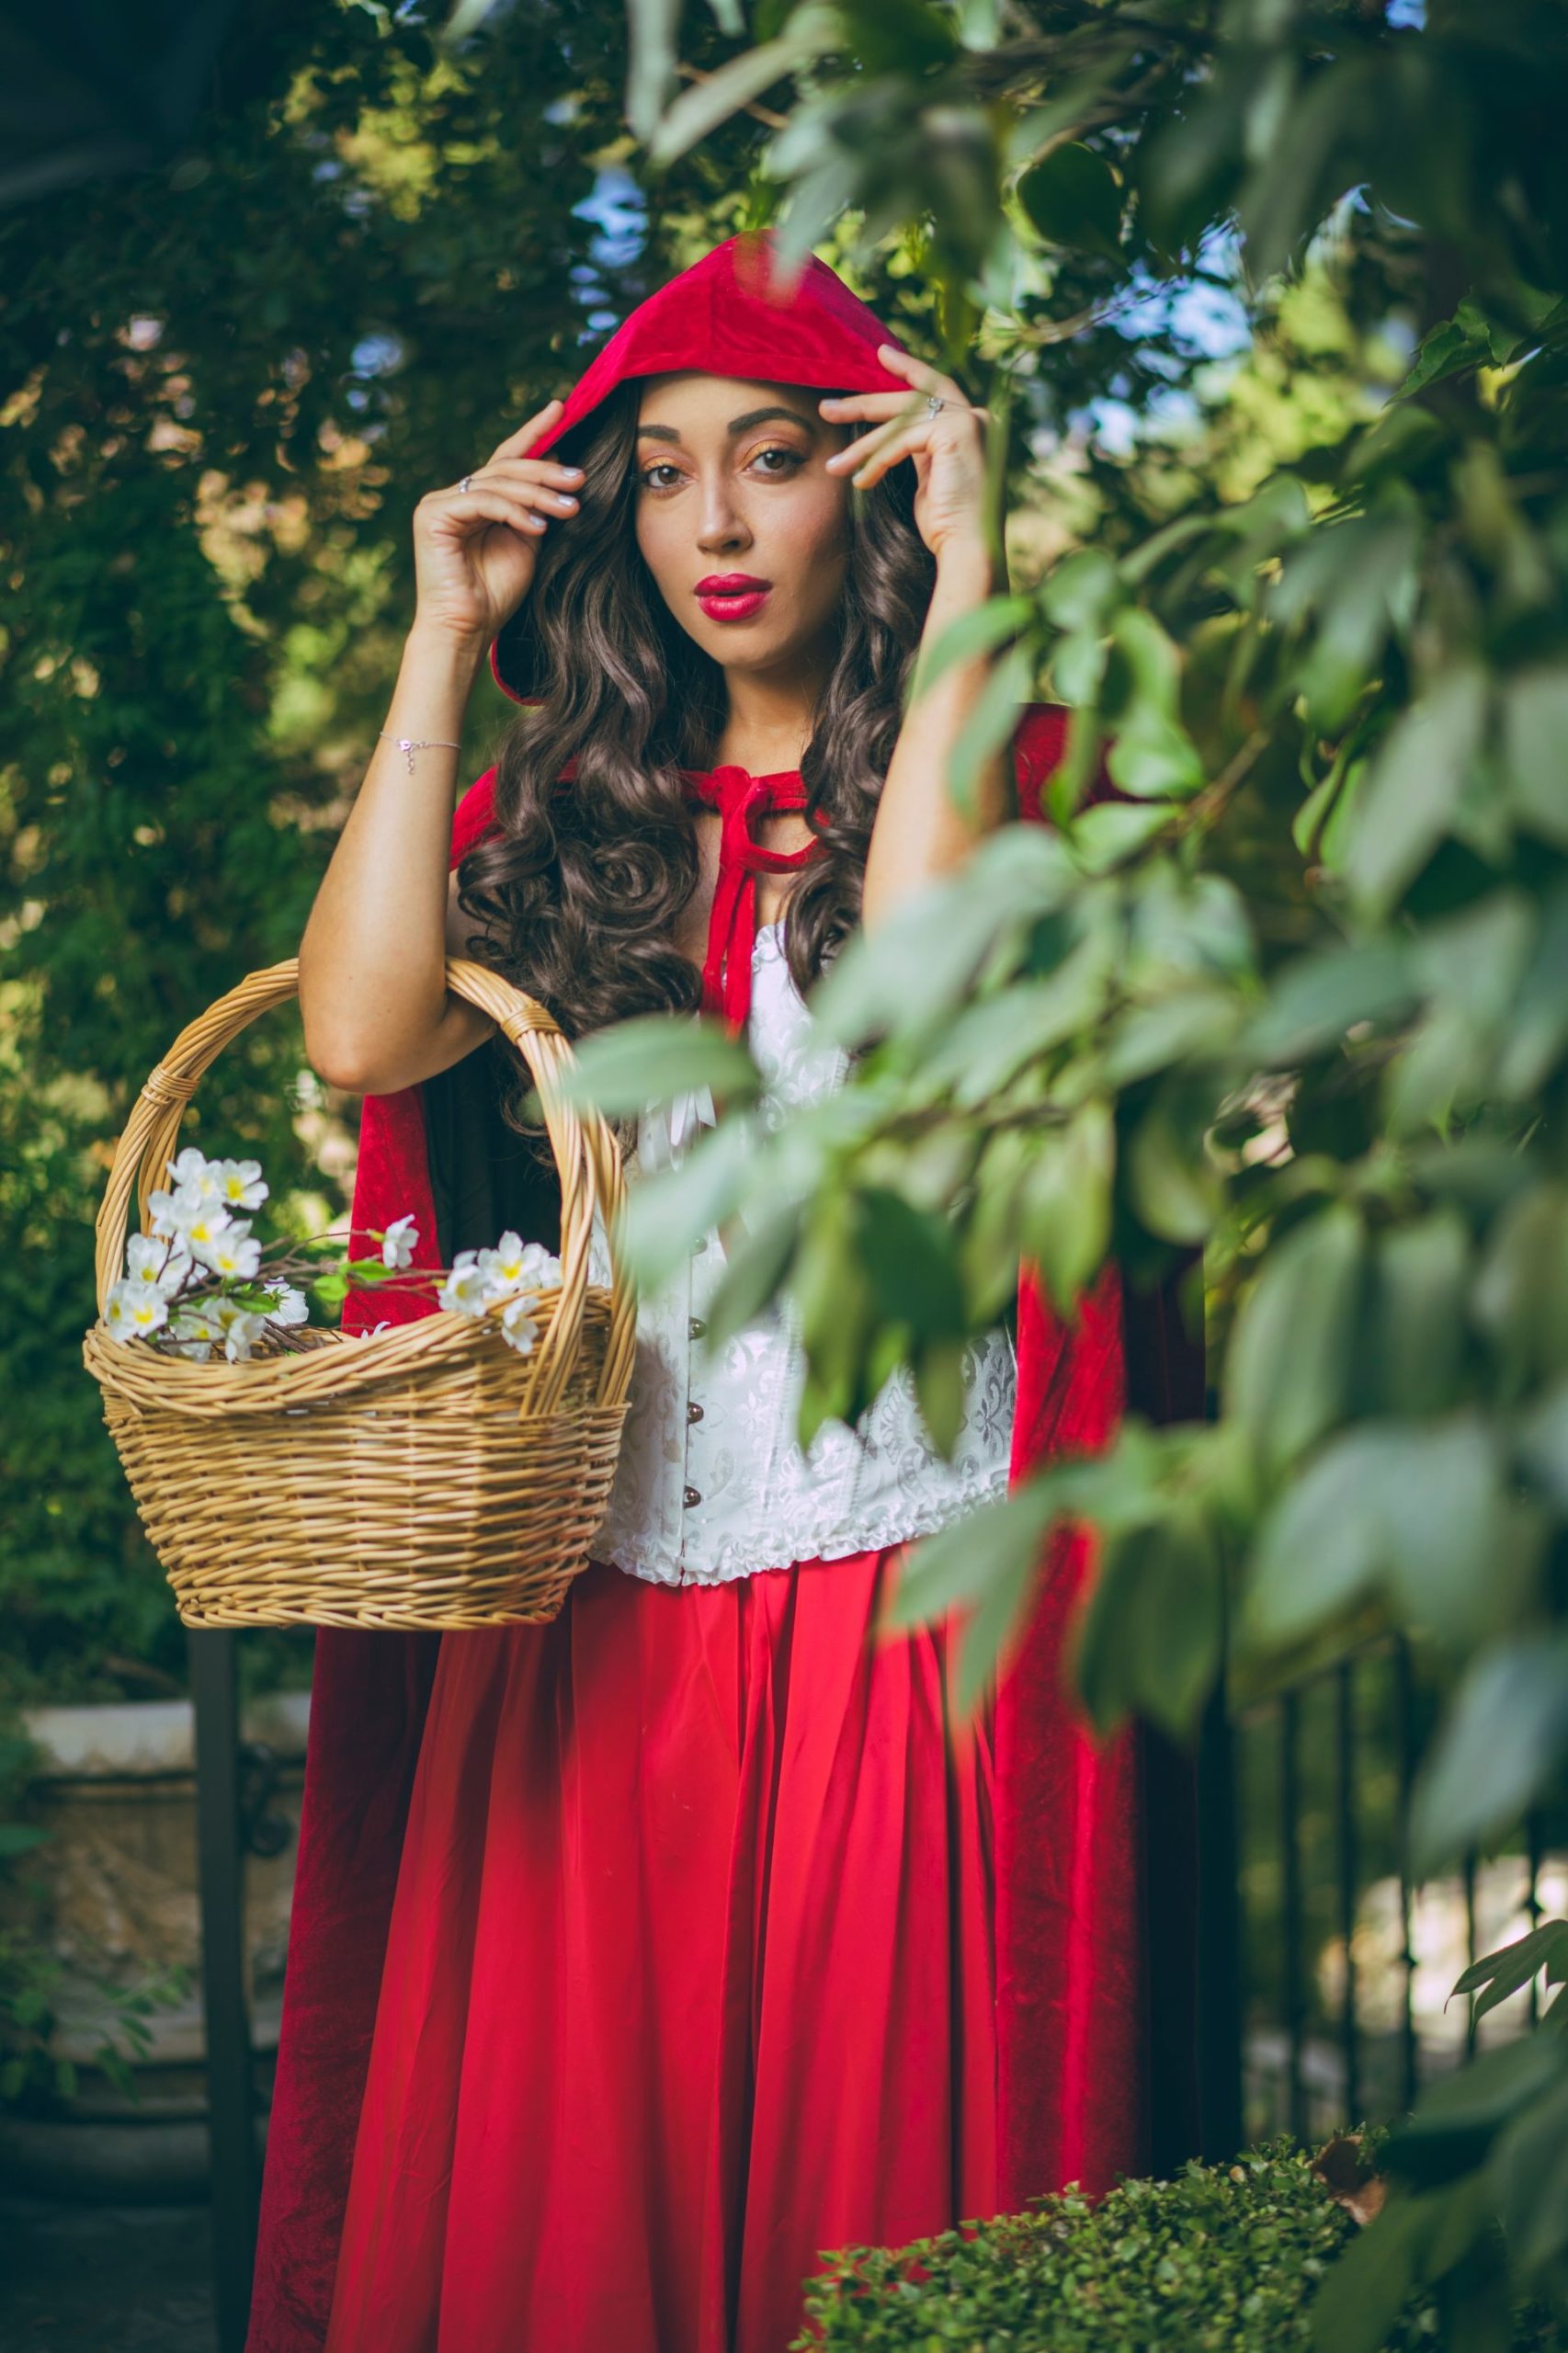 Into The Woods with Little Red Riding Hood - A Keene Sense of Style